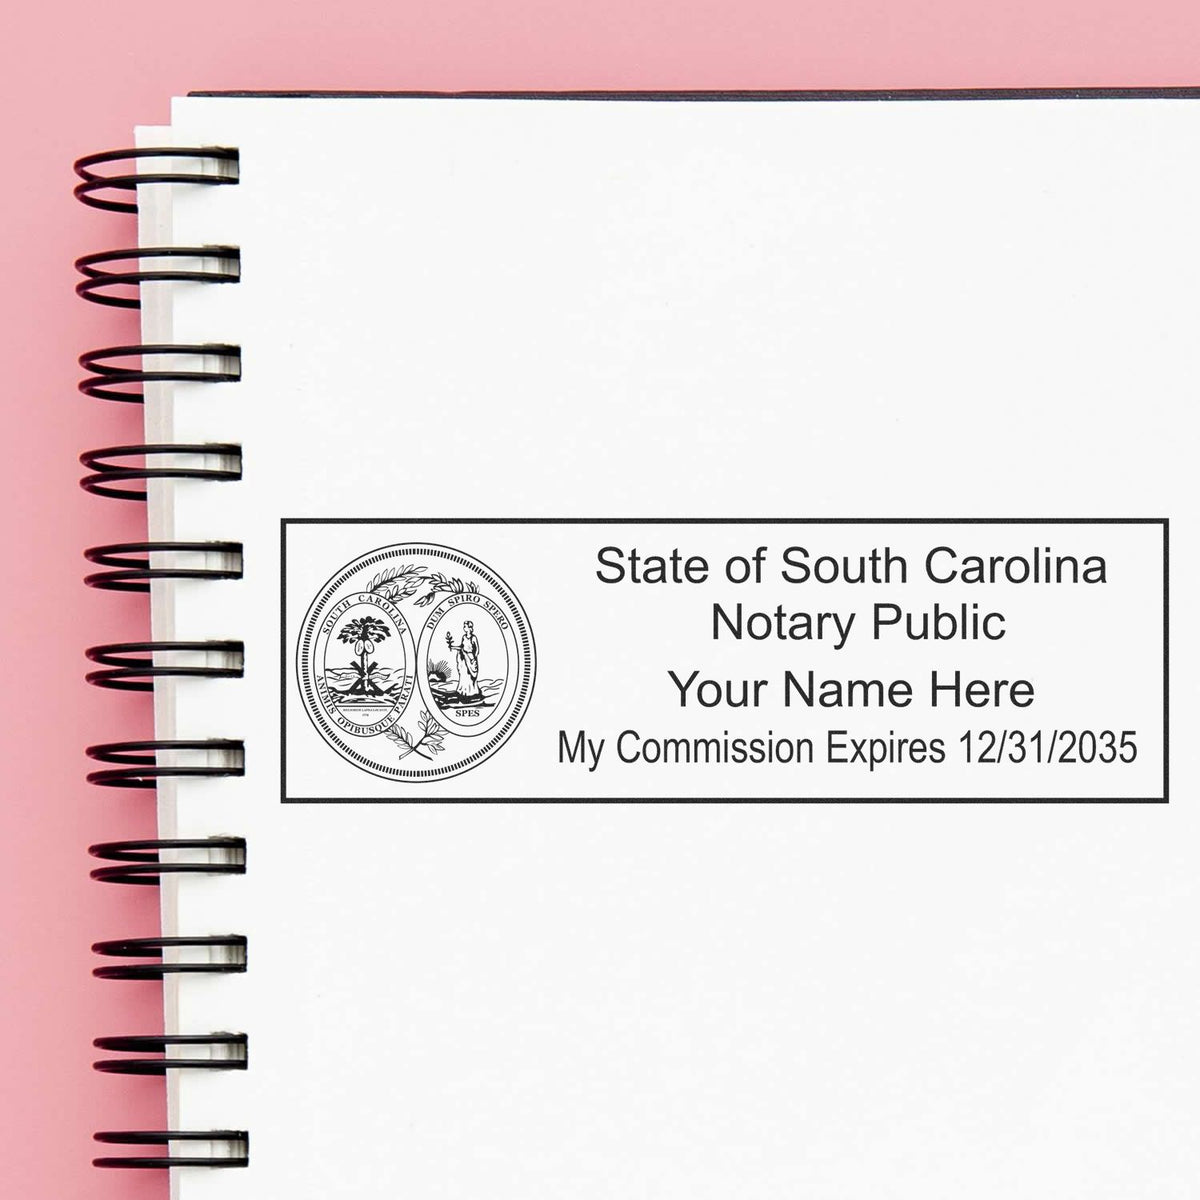 This paper is stamped with a sample imprint of the Super Slim South Carolina Notary Public Stamp, signifying its quality and reliability.